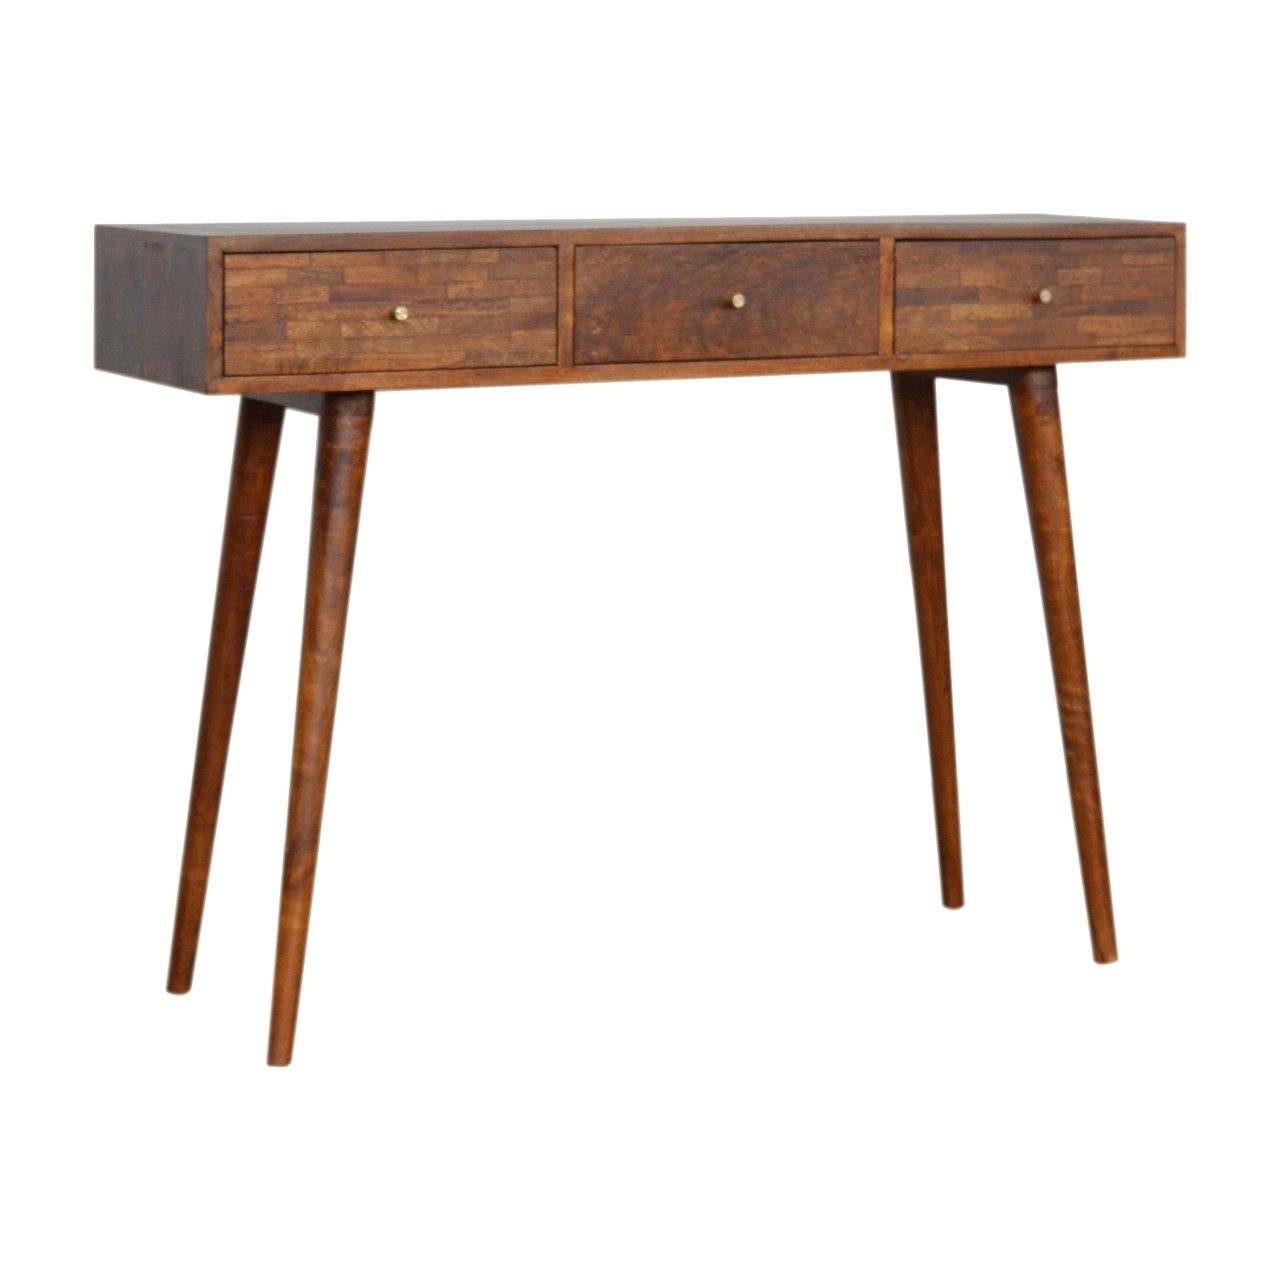 Solid Mango Wood Varied Chestnut Finished 3 Drawer Console Throughout Natural Mango Wood Console Tables (View 6 of 20)